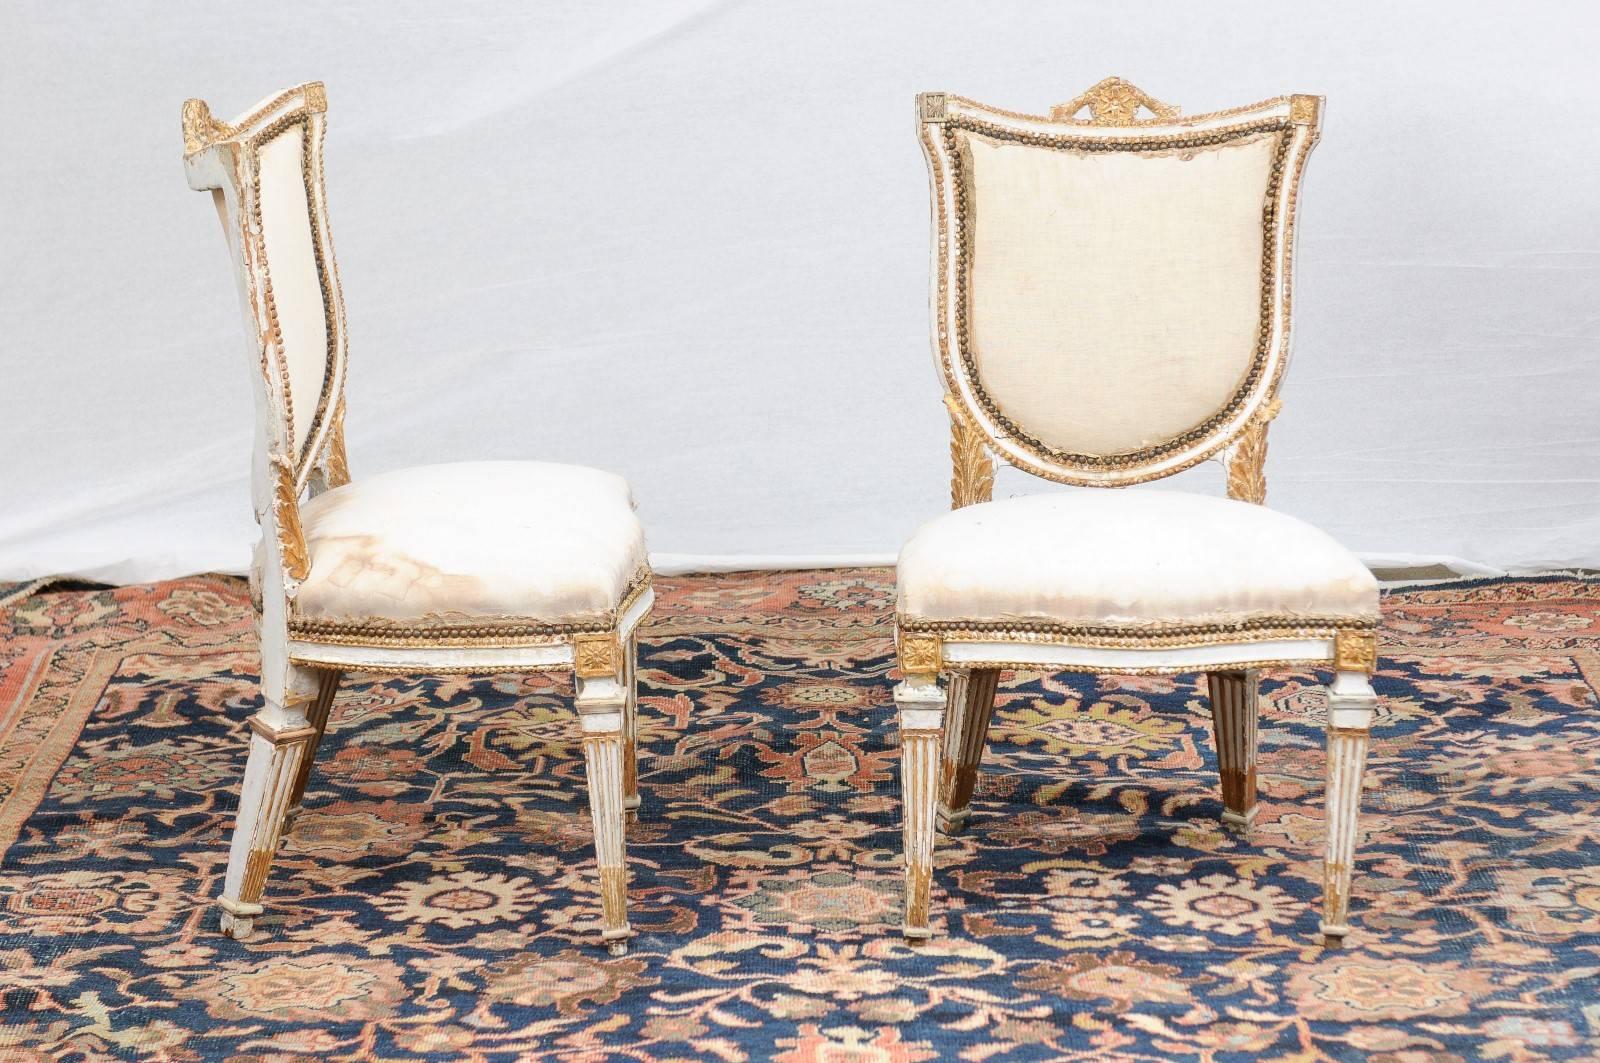 18th Century Pair of Italian Neoclassical Painted and Gilded Side Chairs with Shield Backs